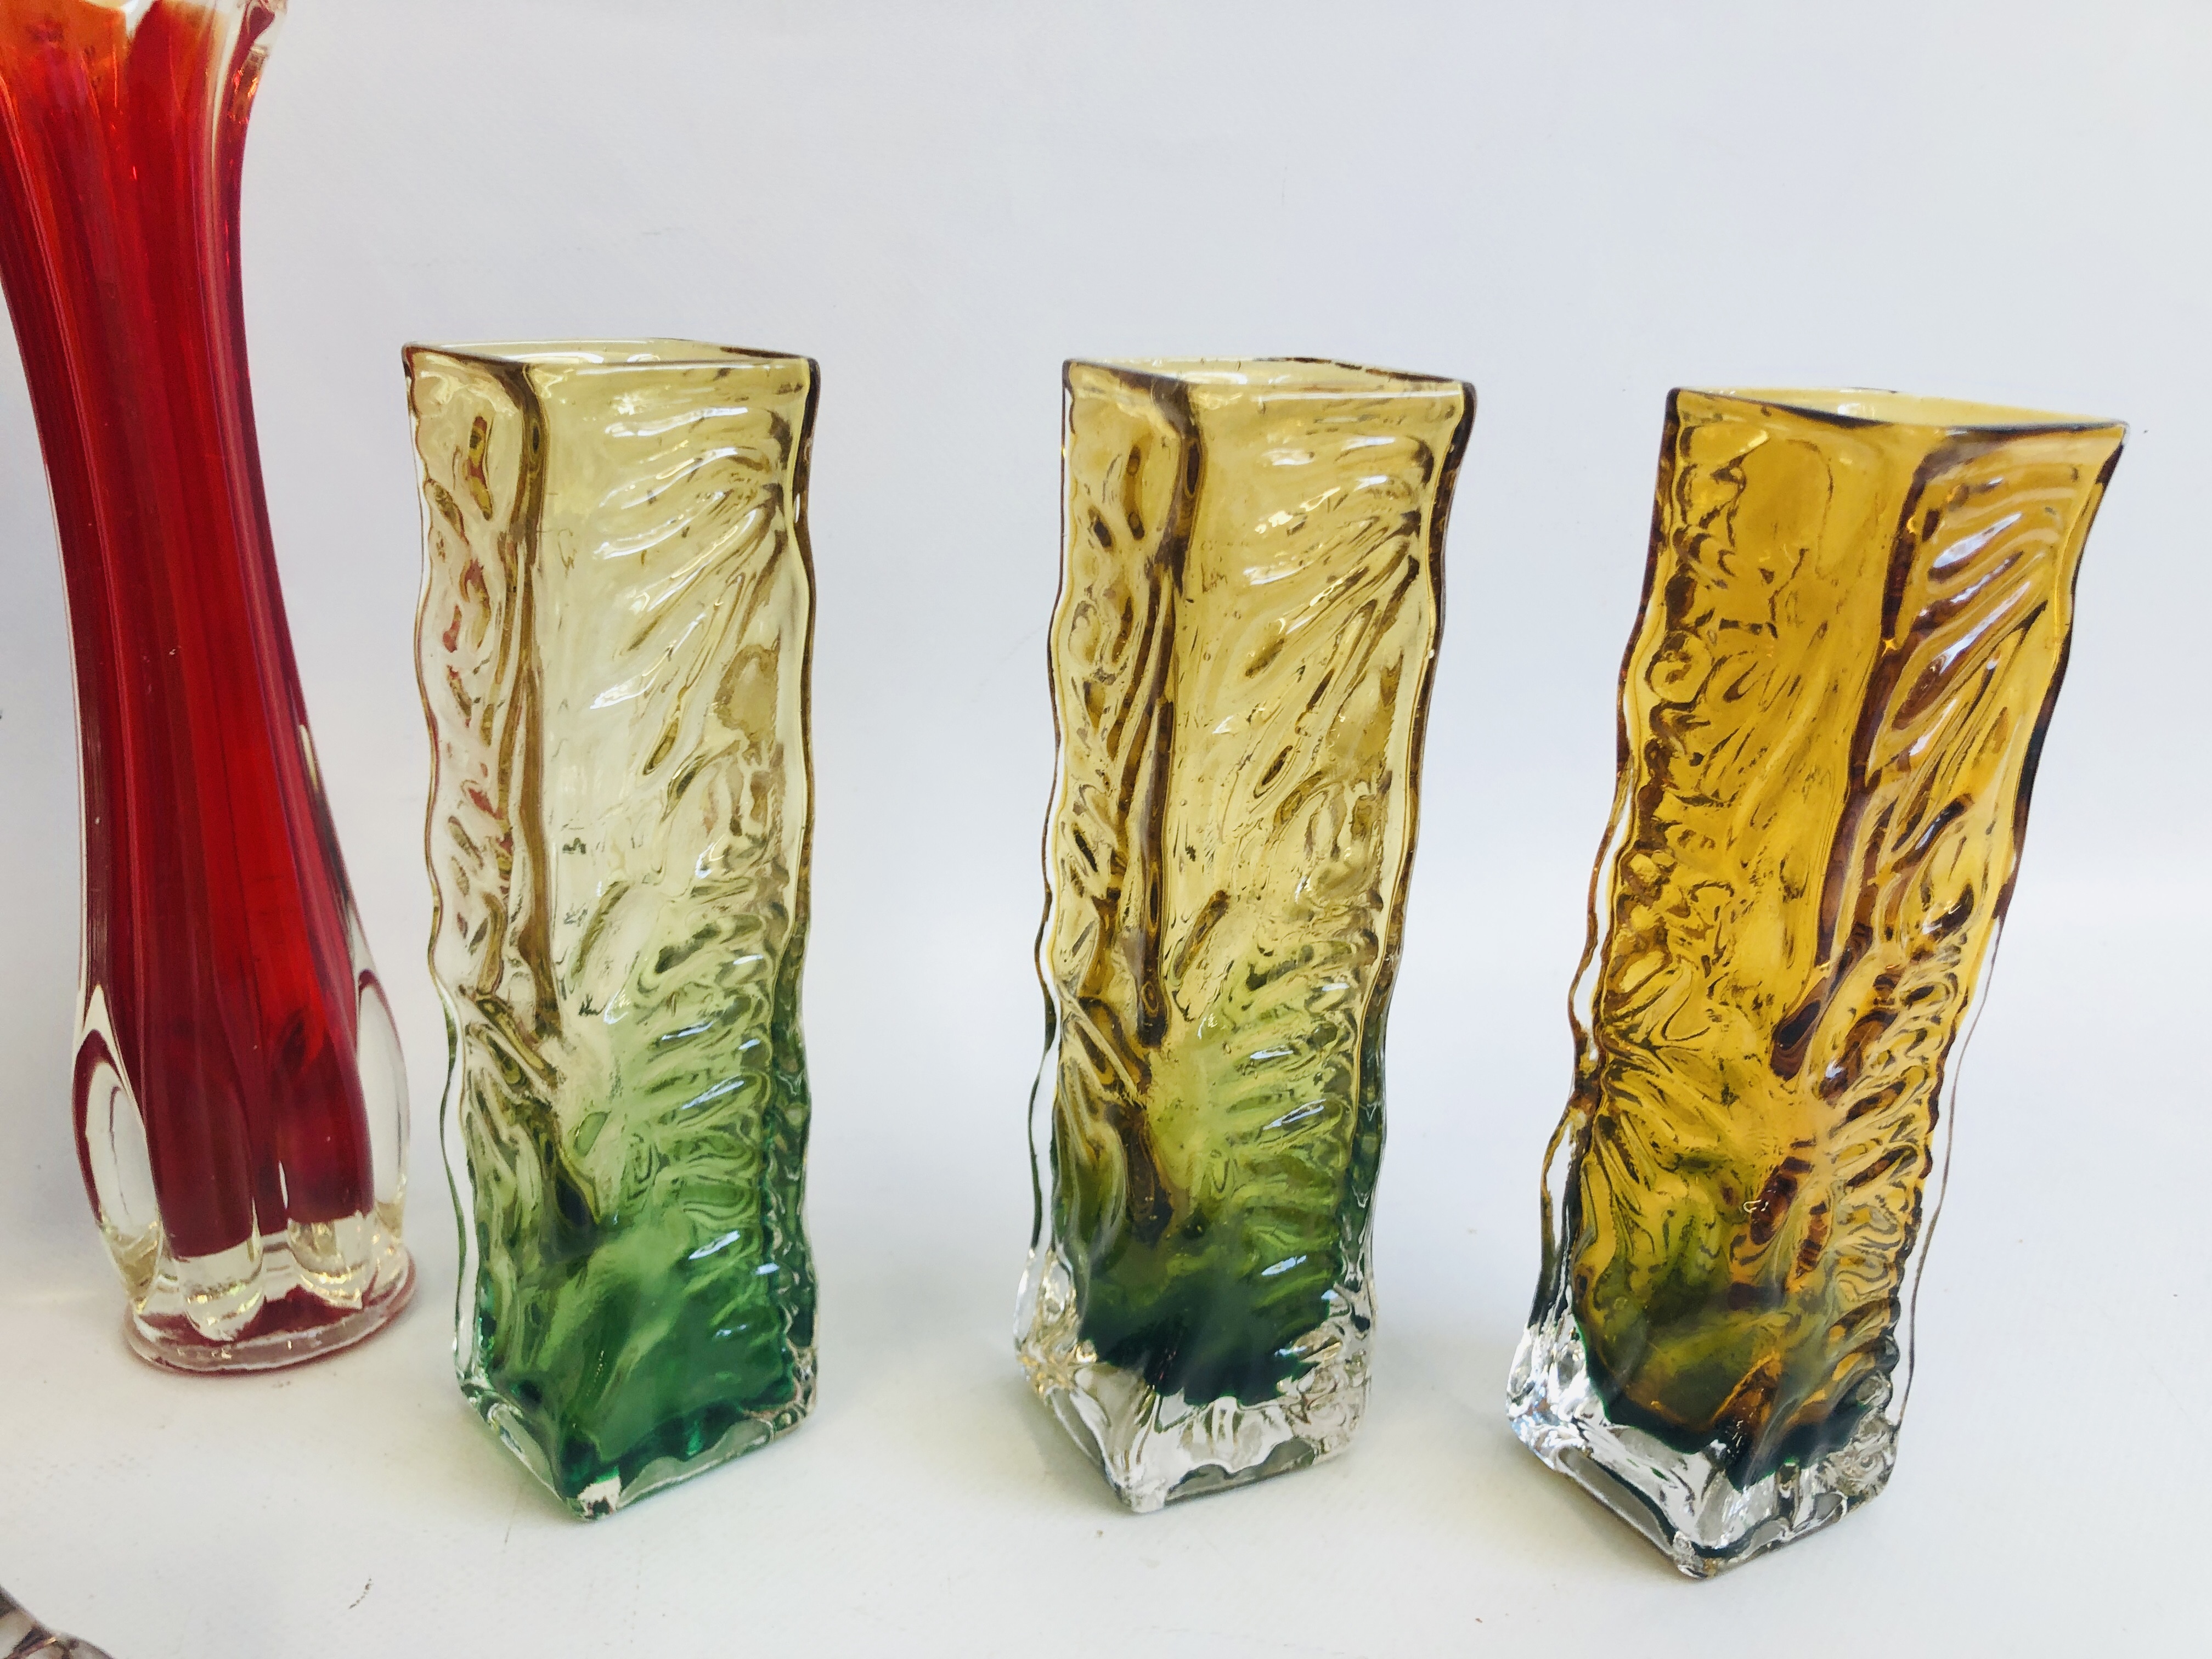 COLLECTION OF ART GLASS TO INCLUDE 3 TAGIMA STYLE VASES - Image 5 of 7